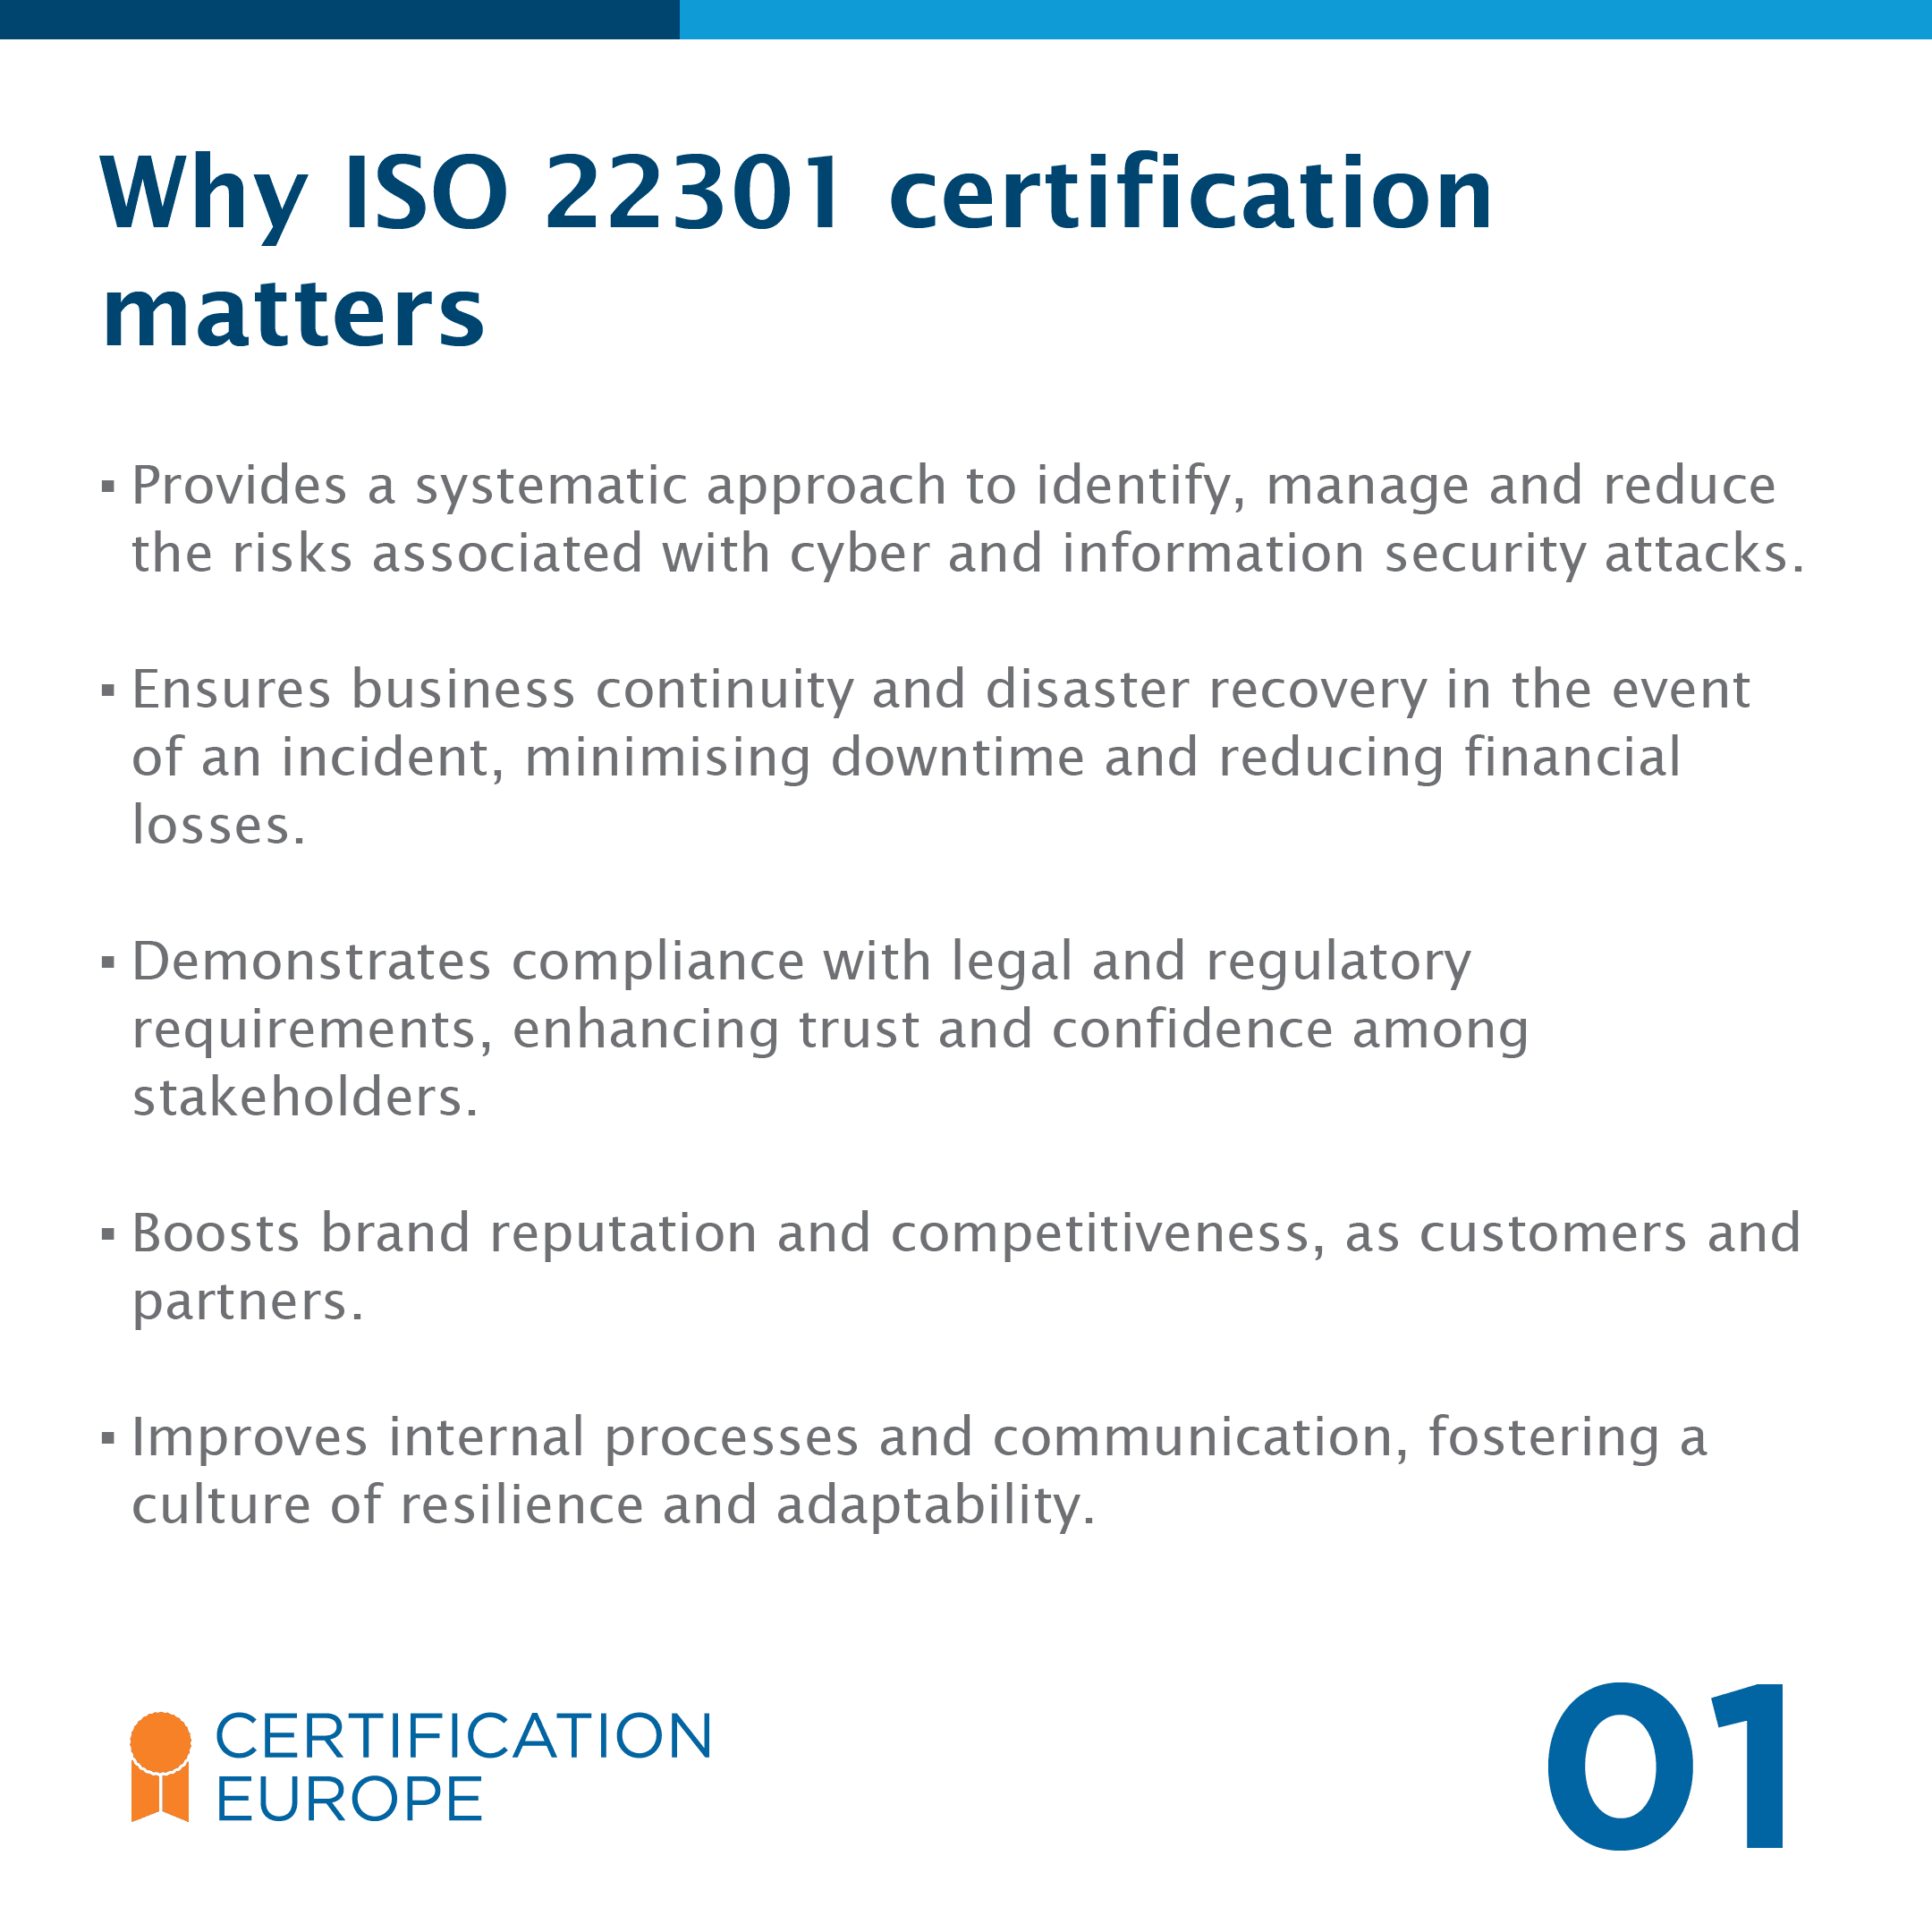 Key benefits of ISO 22301 Certification - 1